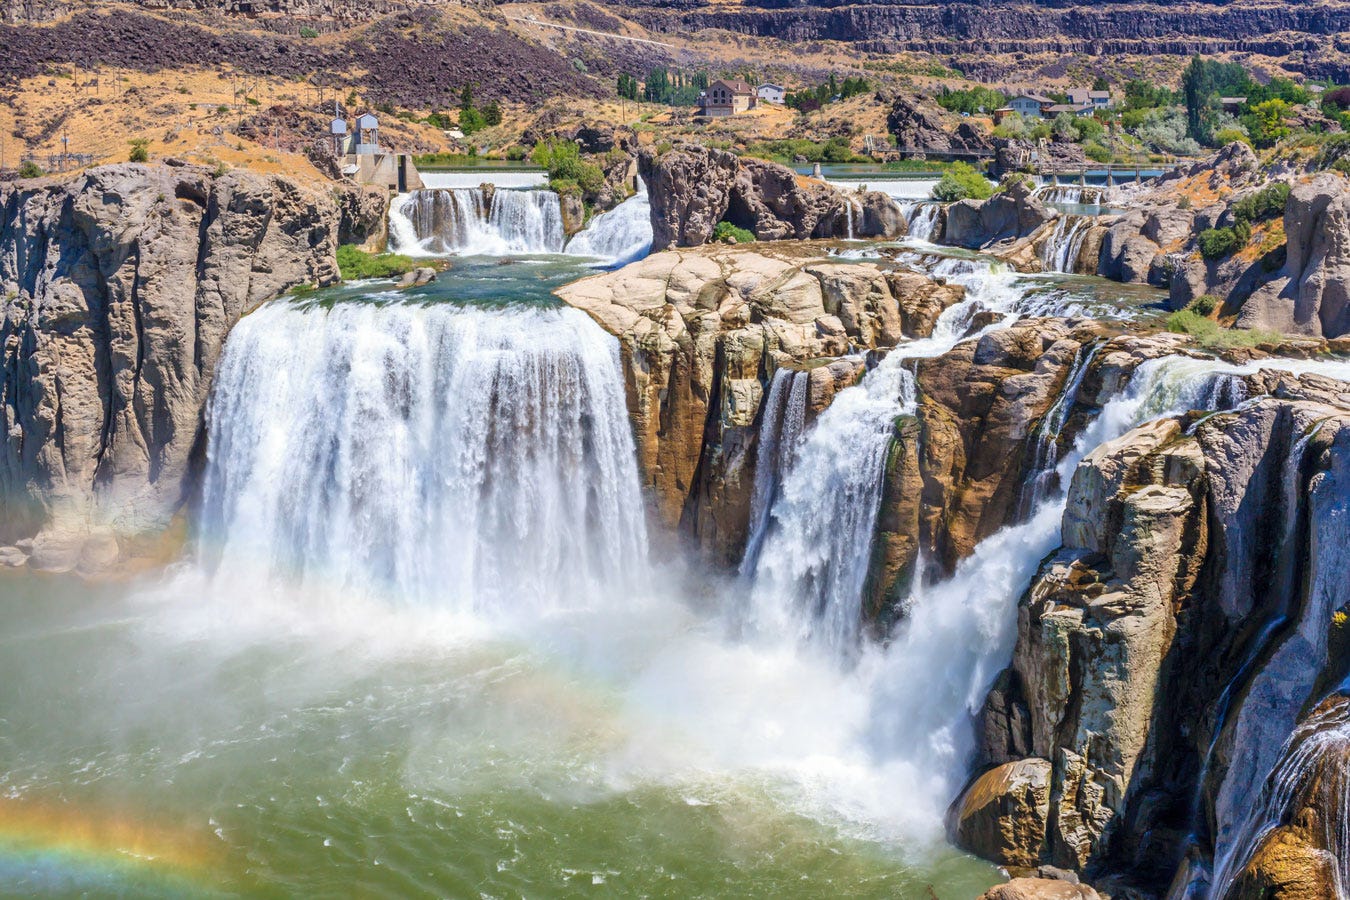 <p>Insider named Shoshone Falls one of <a href="https://www.insider.com/best-waterfalls-in-the-us-2018-3">11 spectacular waterfalls in the US you need to see in your lifetime</a>.</p>